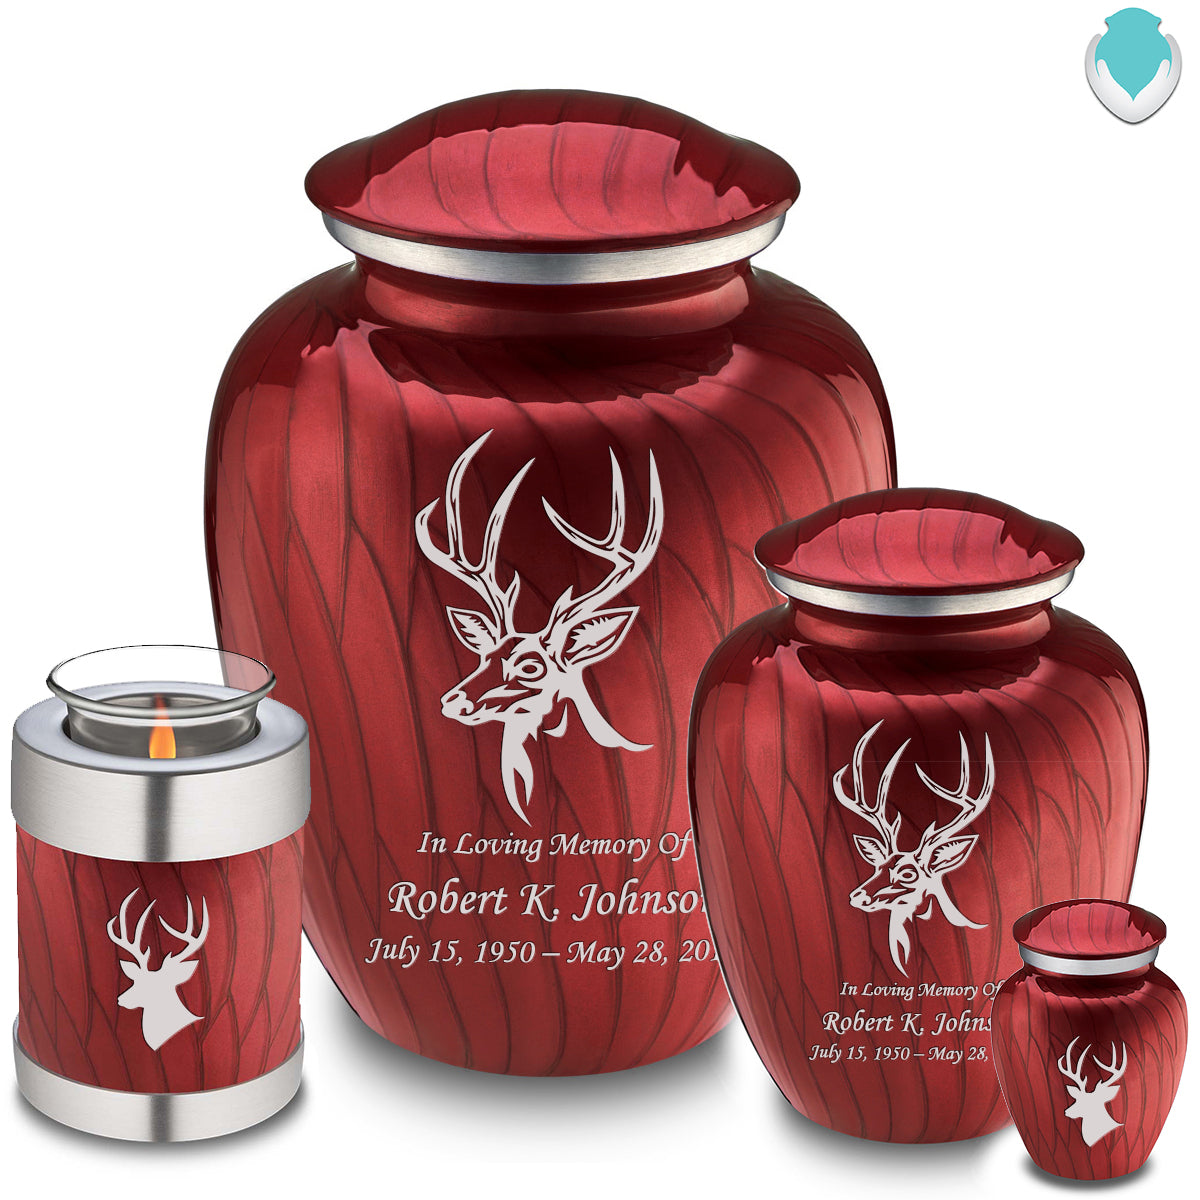 Adult Embrace Pearl Candy Red Deer Cremation Urn